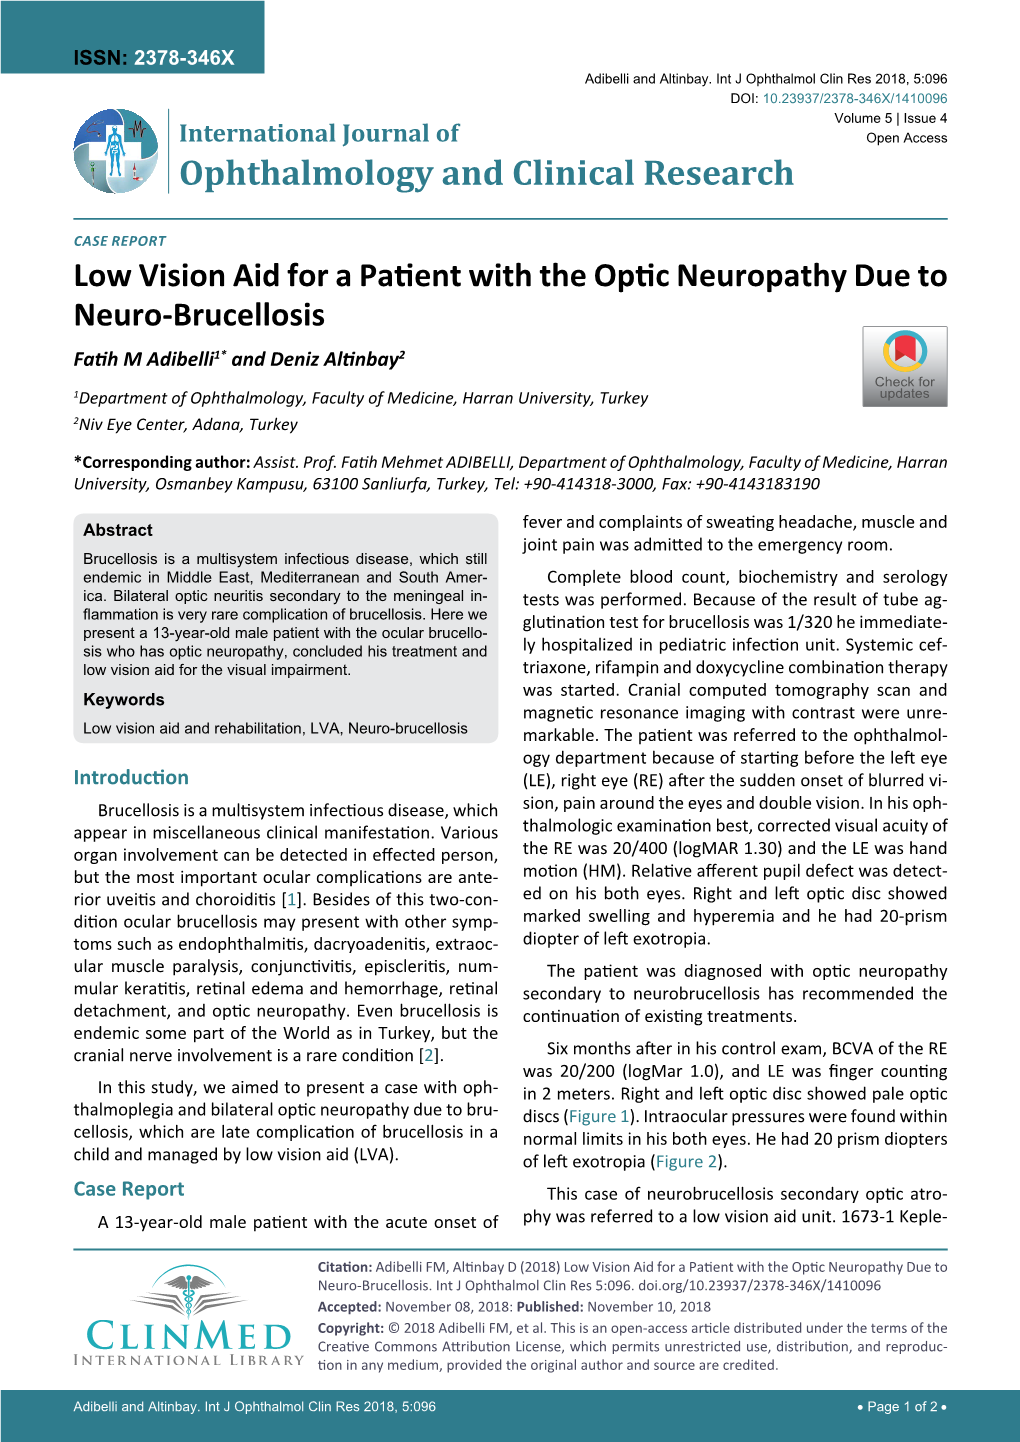 Low Vision Aid for a Patient with the Optic Neuropathy Due to Neuro